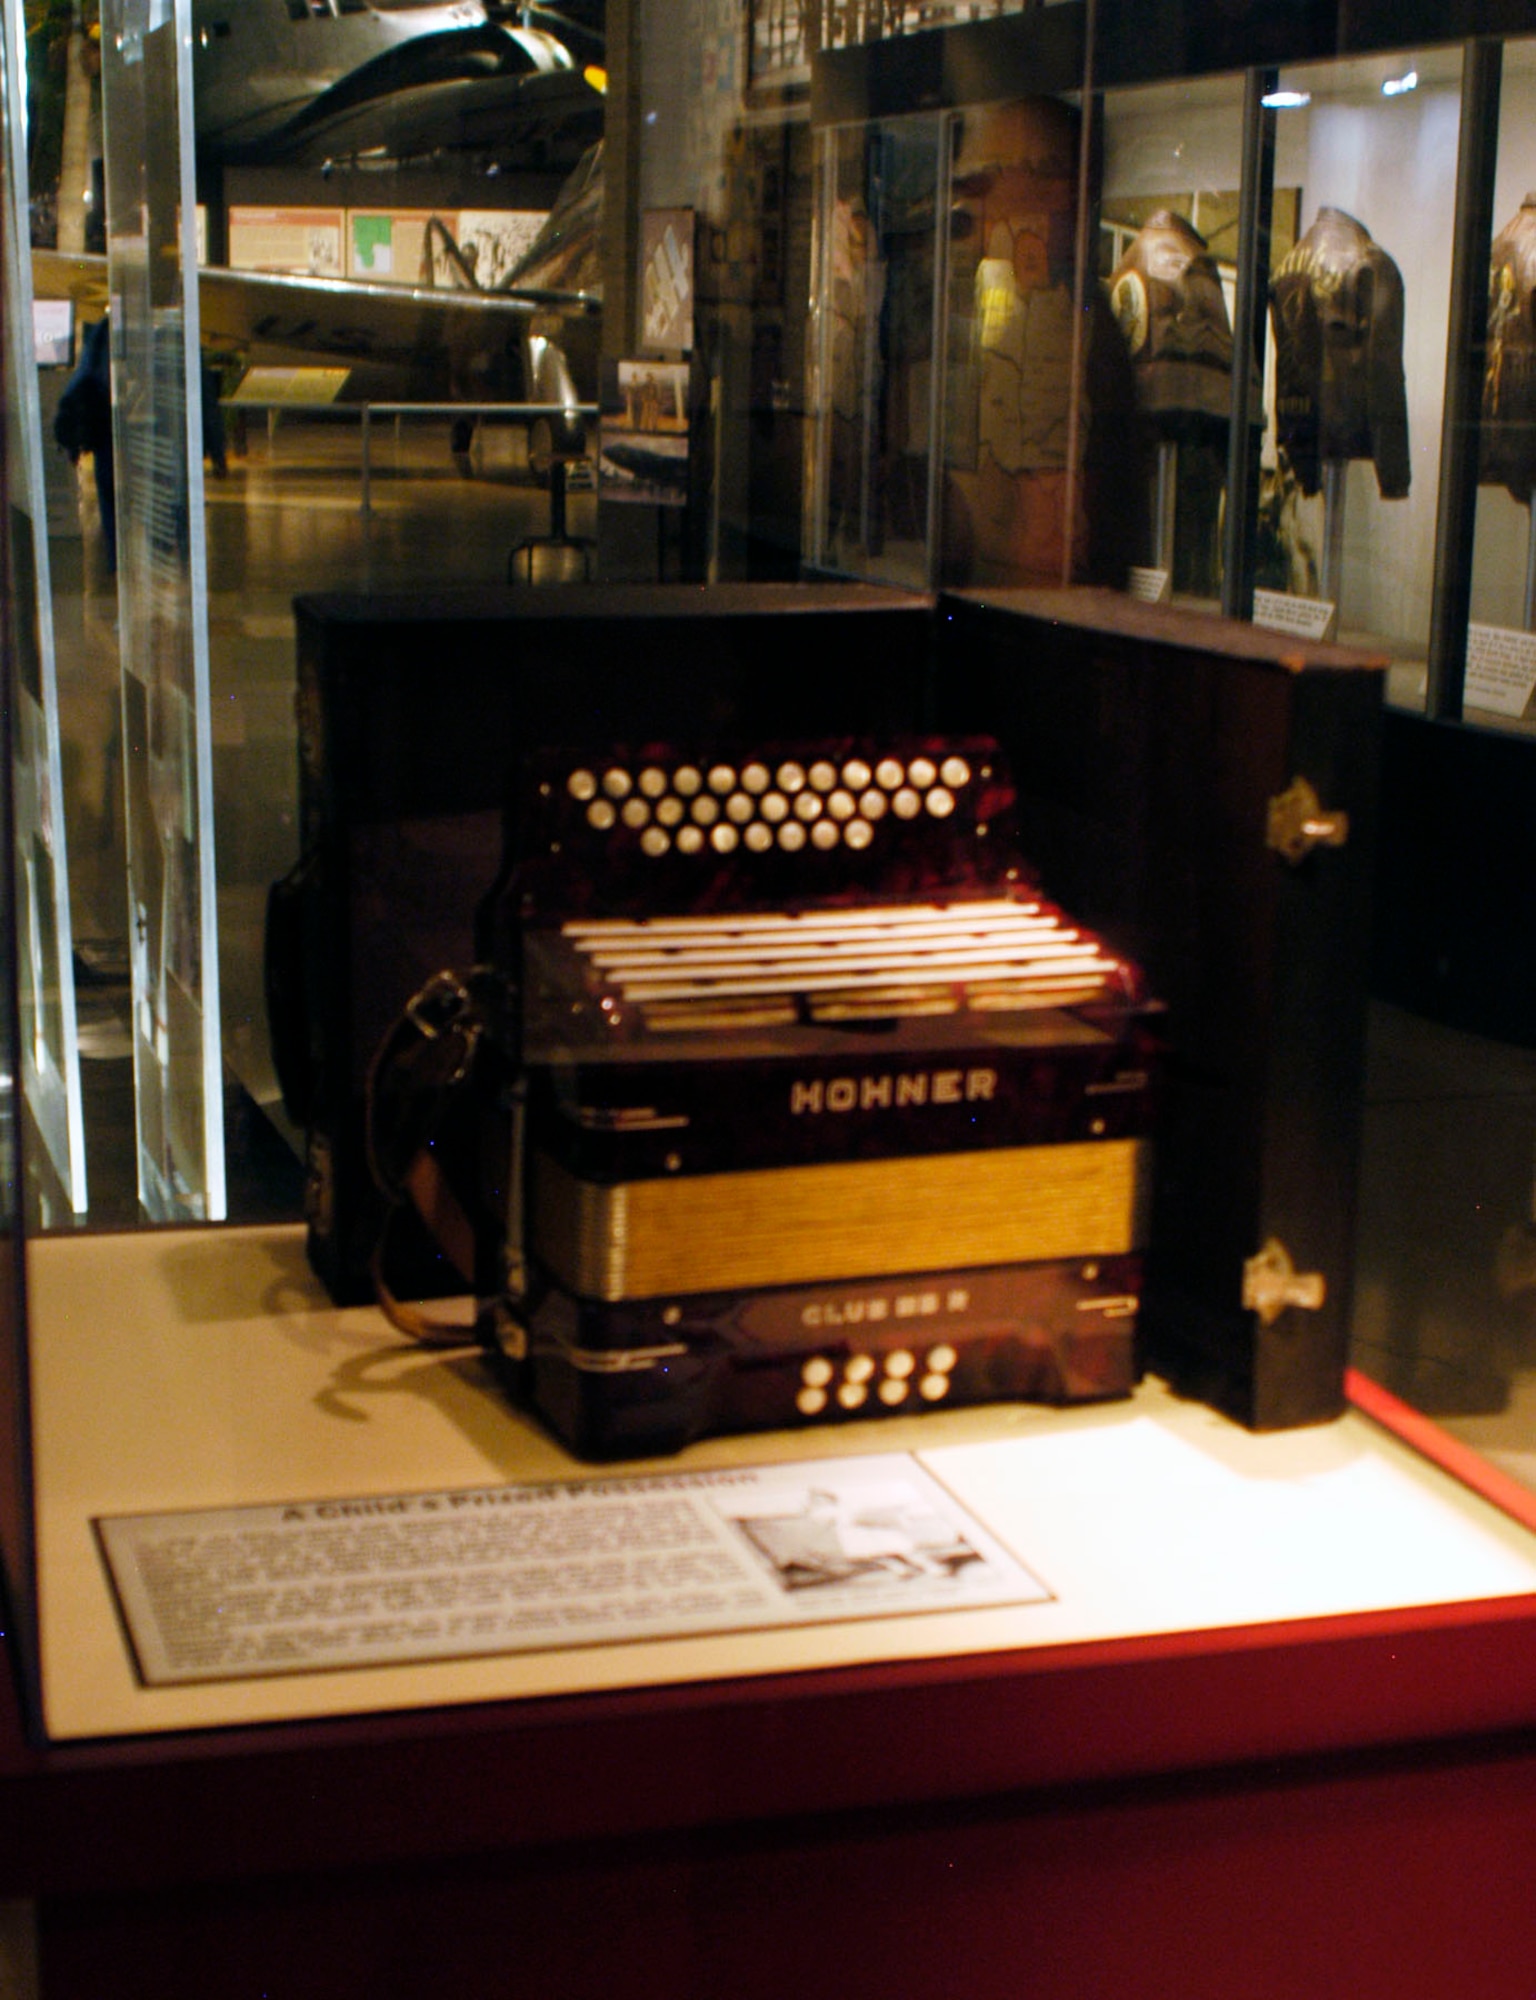 DAYTON, Ohio -- Accordion in the "Prejudice & Memory: A Holocaust Exhibit" at the National Museum of the U.S. Air Force. (U.S. Air Force photo)